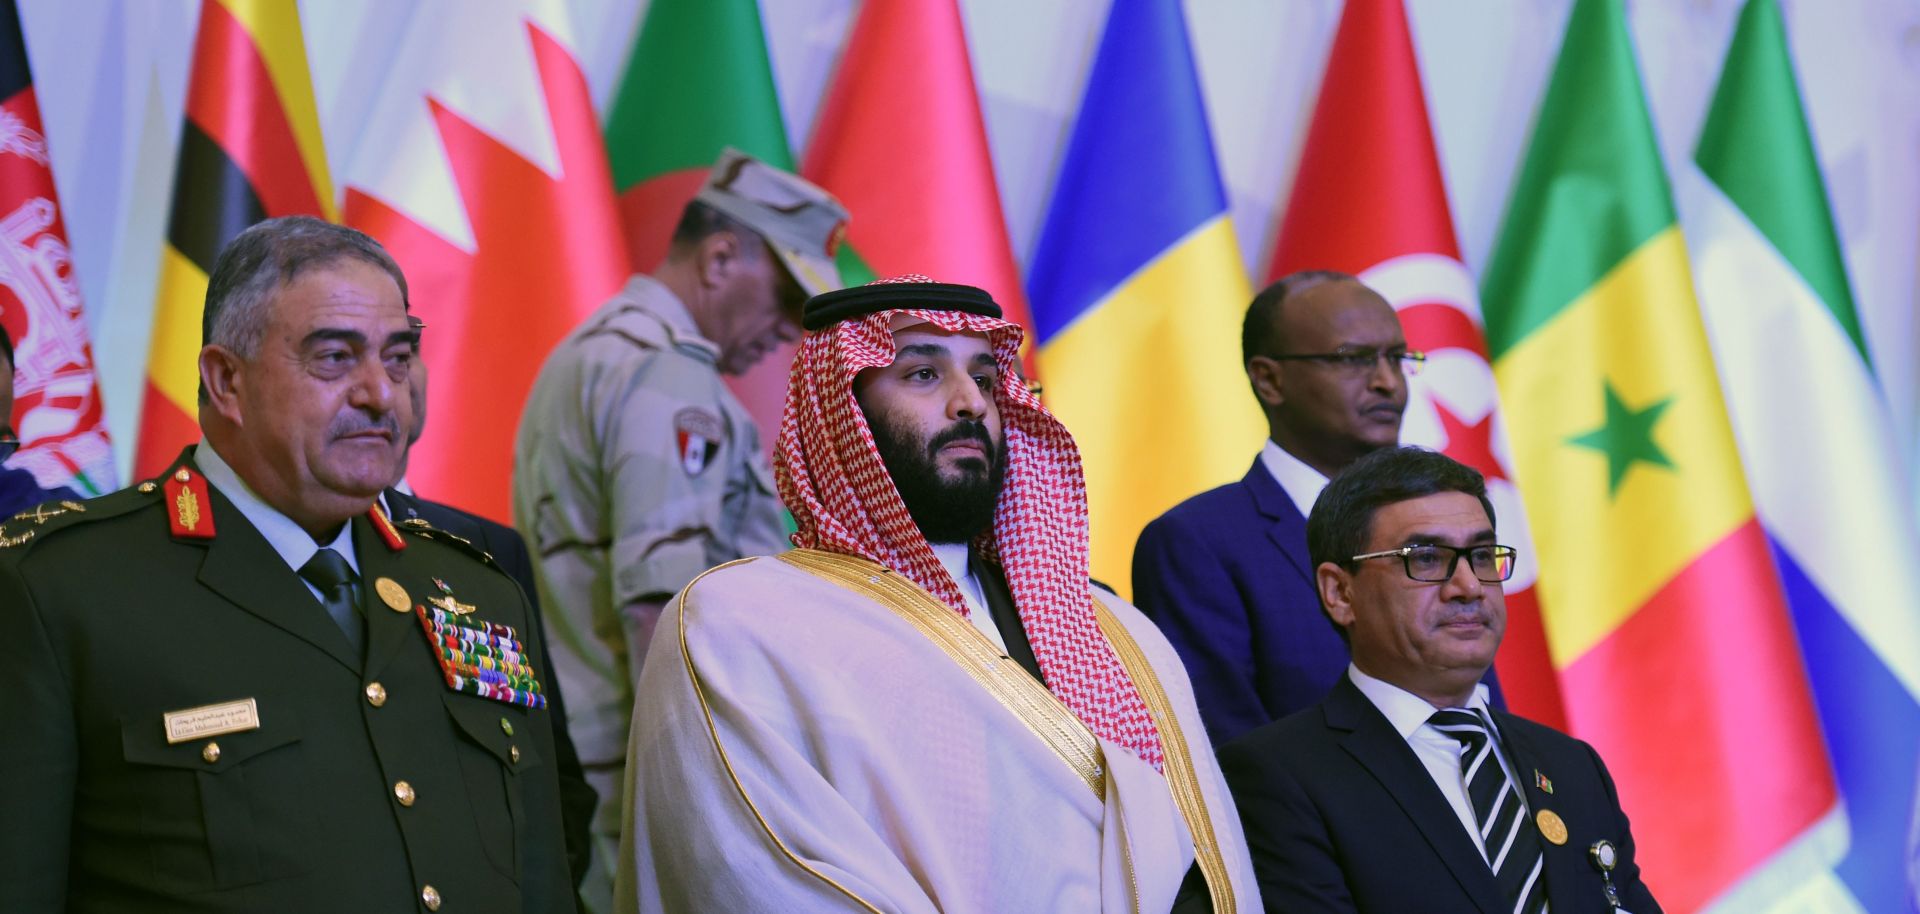 Saudi Defense Minister and Crown Prince Mohammed bin Salman, center, stands for a photo-op with his counterparts from other countries in Saudi Arabia's Islamic Military Counterterrorism Coalition at a meeting in Riyadh.